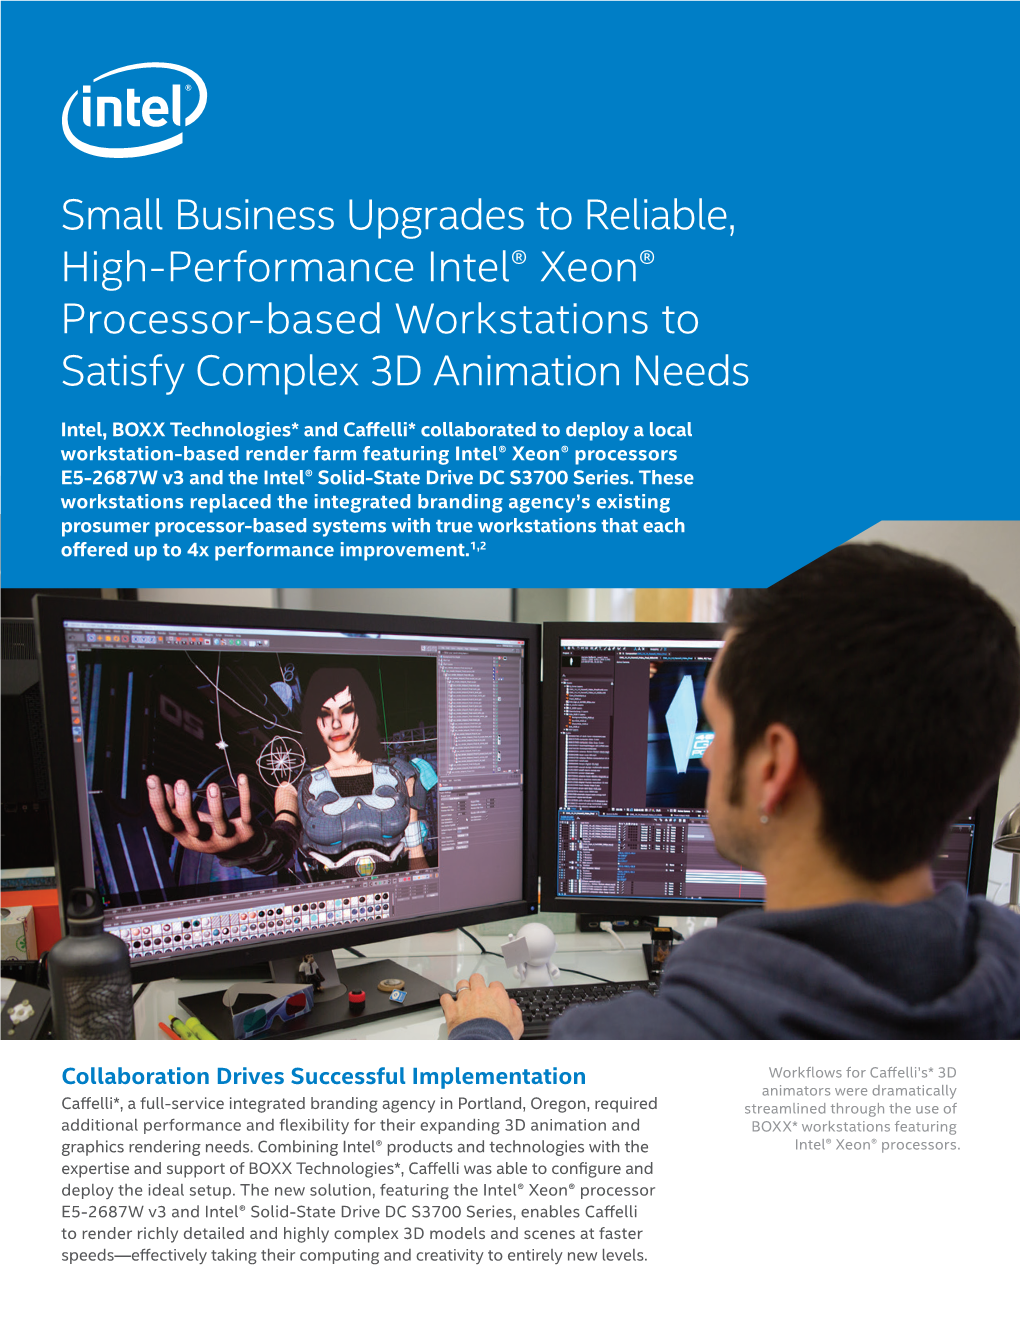 Small Business Upgrades to Reliable, High-Performance Intel® Xeon® Processor-Based Workstations to Satisfy Complex 3D Animation Needs